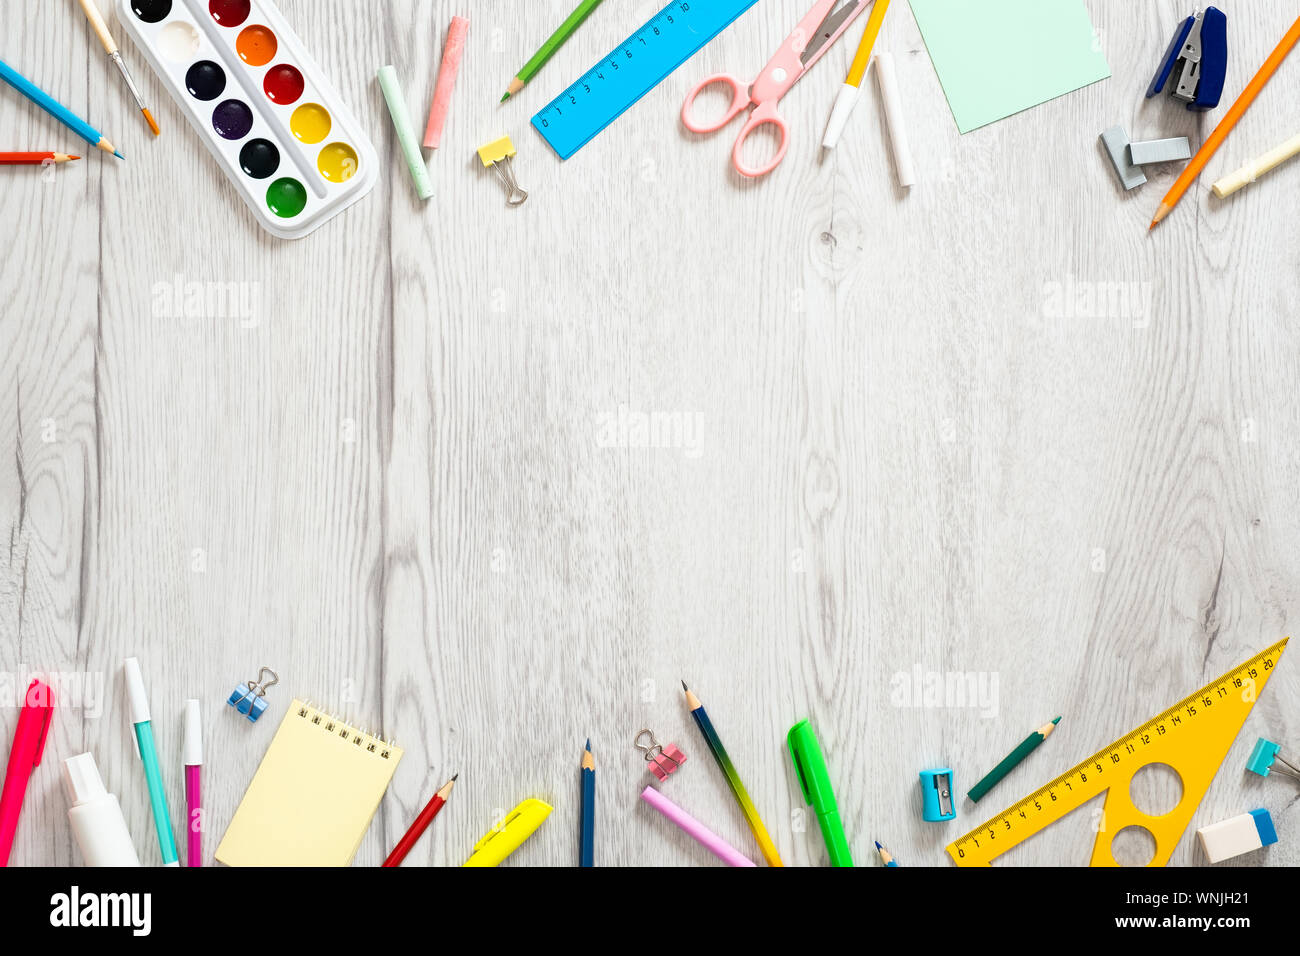 https://c8.alamy.com/comp/WNJH21/back-to-school-concept-creative-layout-with-with-various-school-supplies-and-stationery-on-wooden-desk-table-flat-lay-design-top-view-overhead-WNJH21.jpg